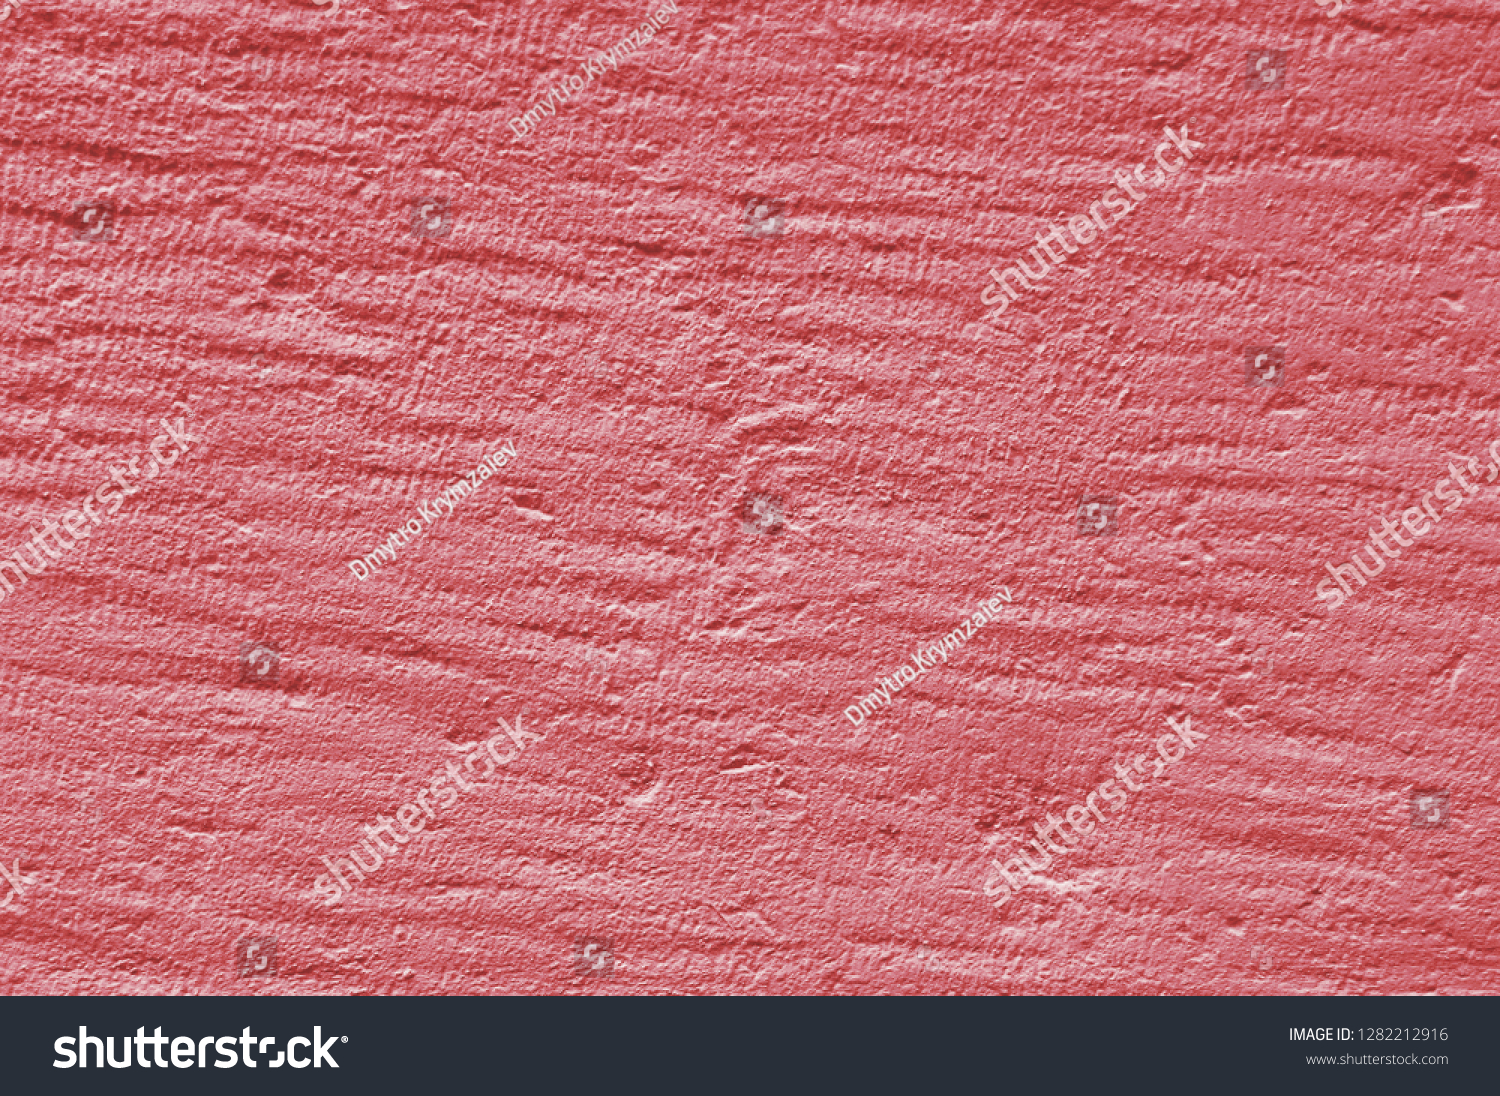 pink saturated surface for texture, background, text or image #1282212916